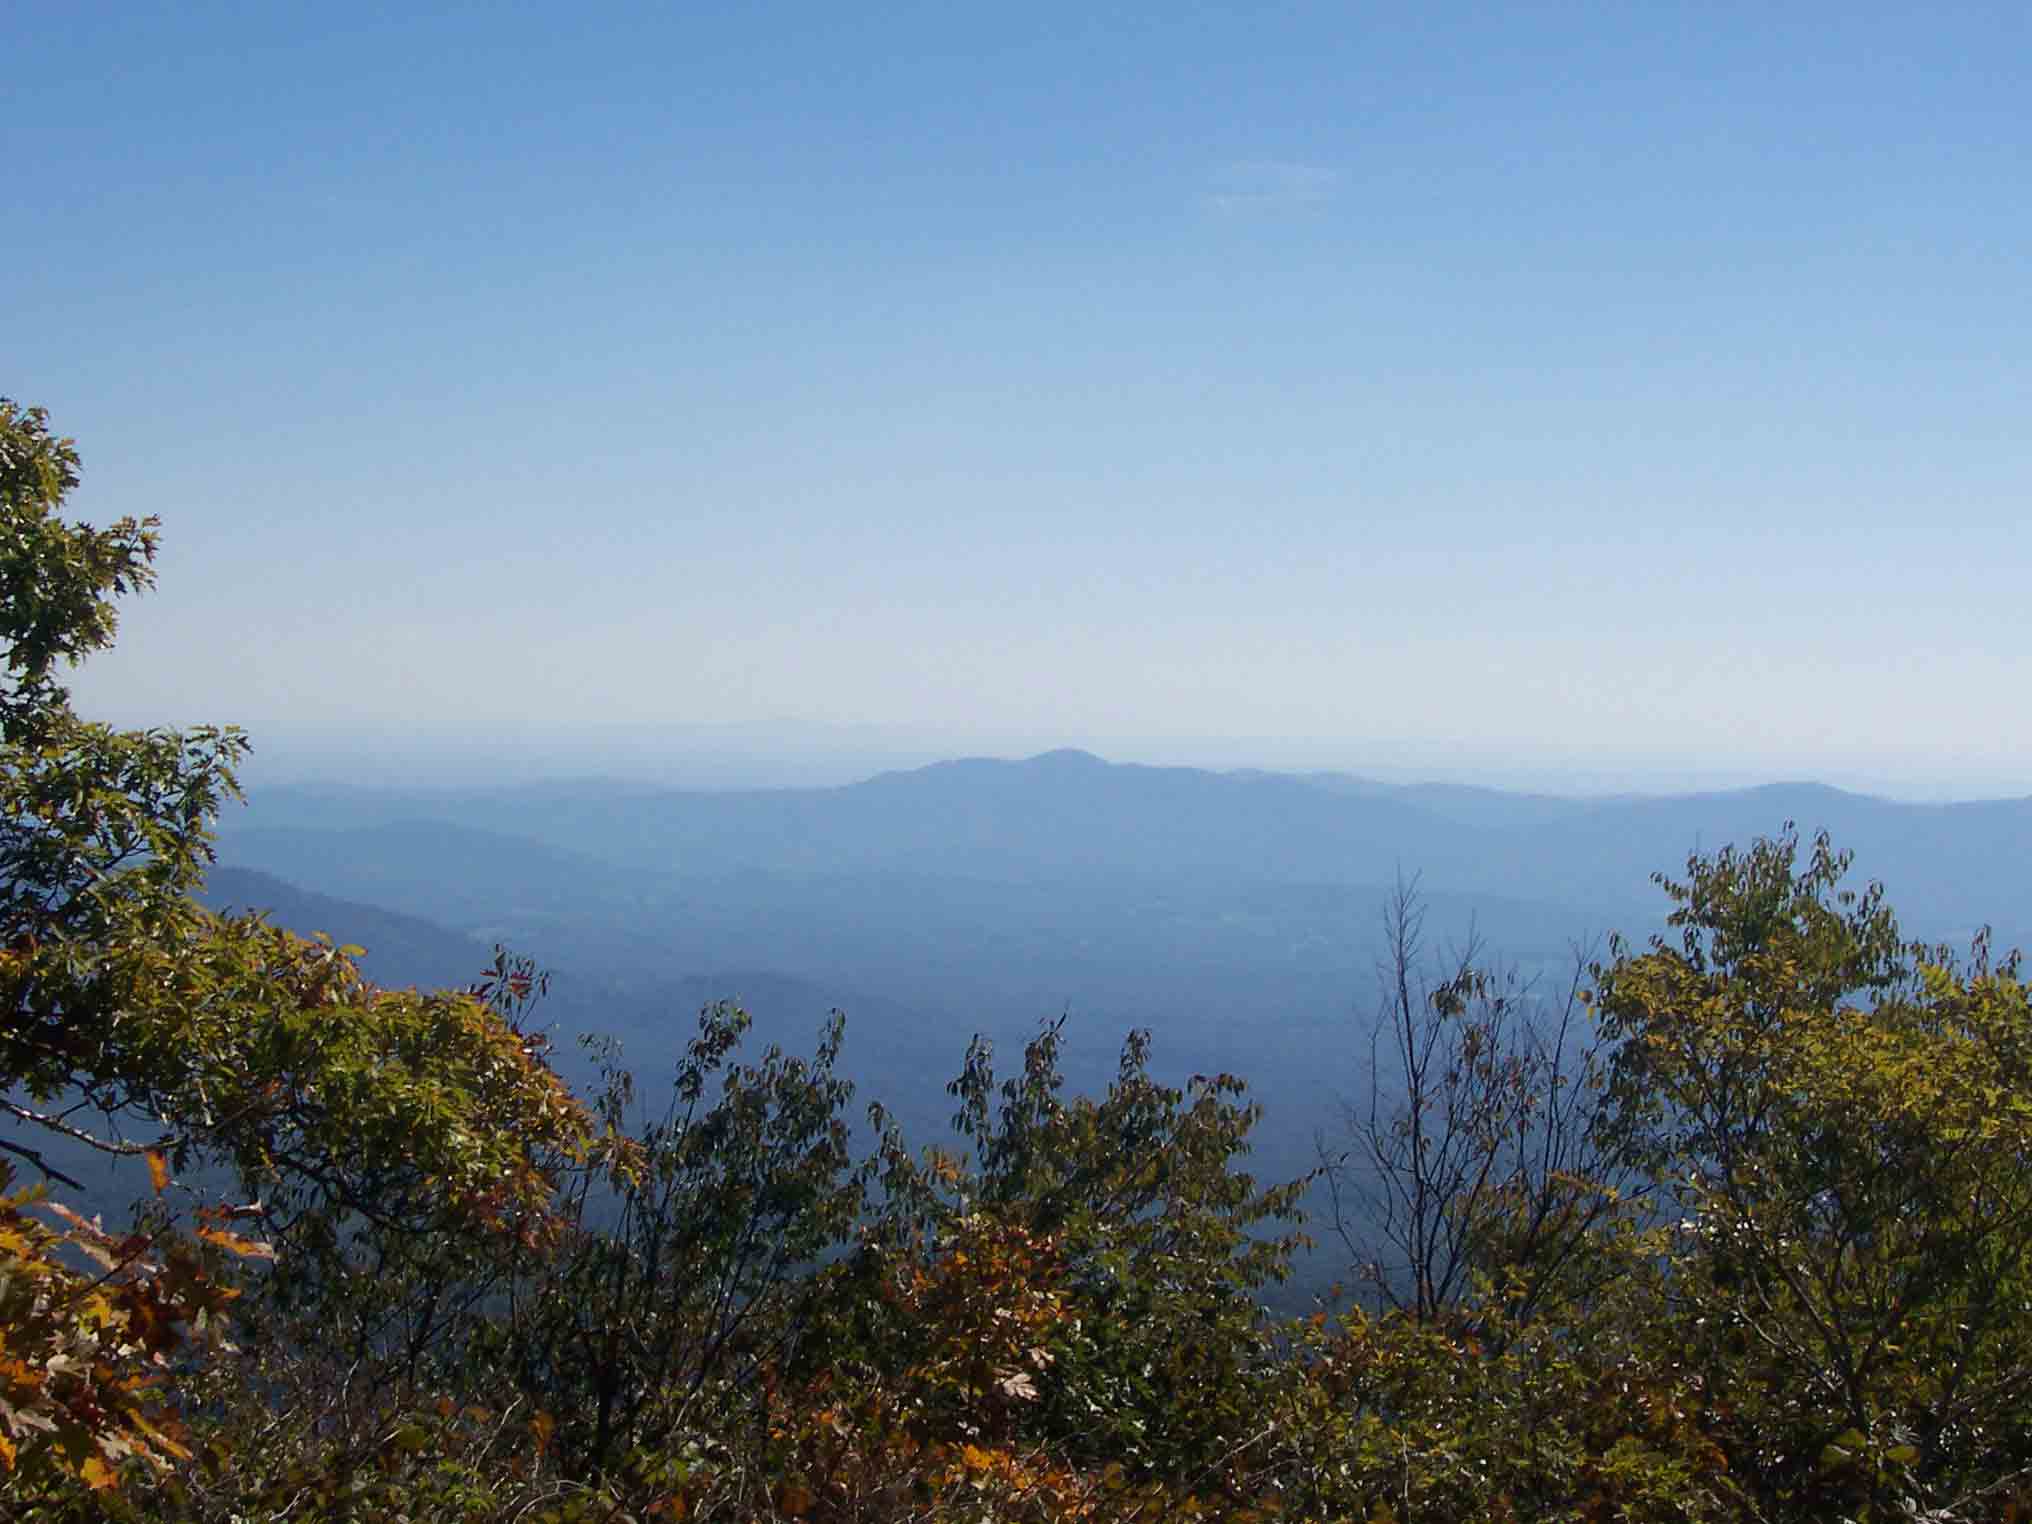 mm 2.0 - View to southeast from summit of Bluff Mt.  Courtesy dlcul@conncoll.edu